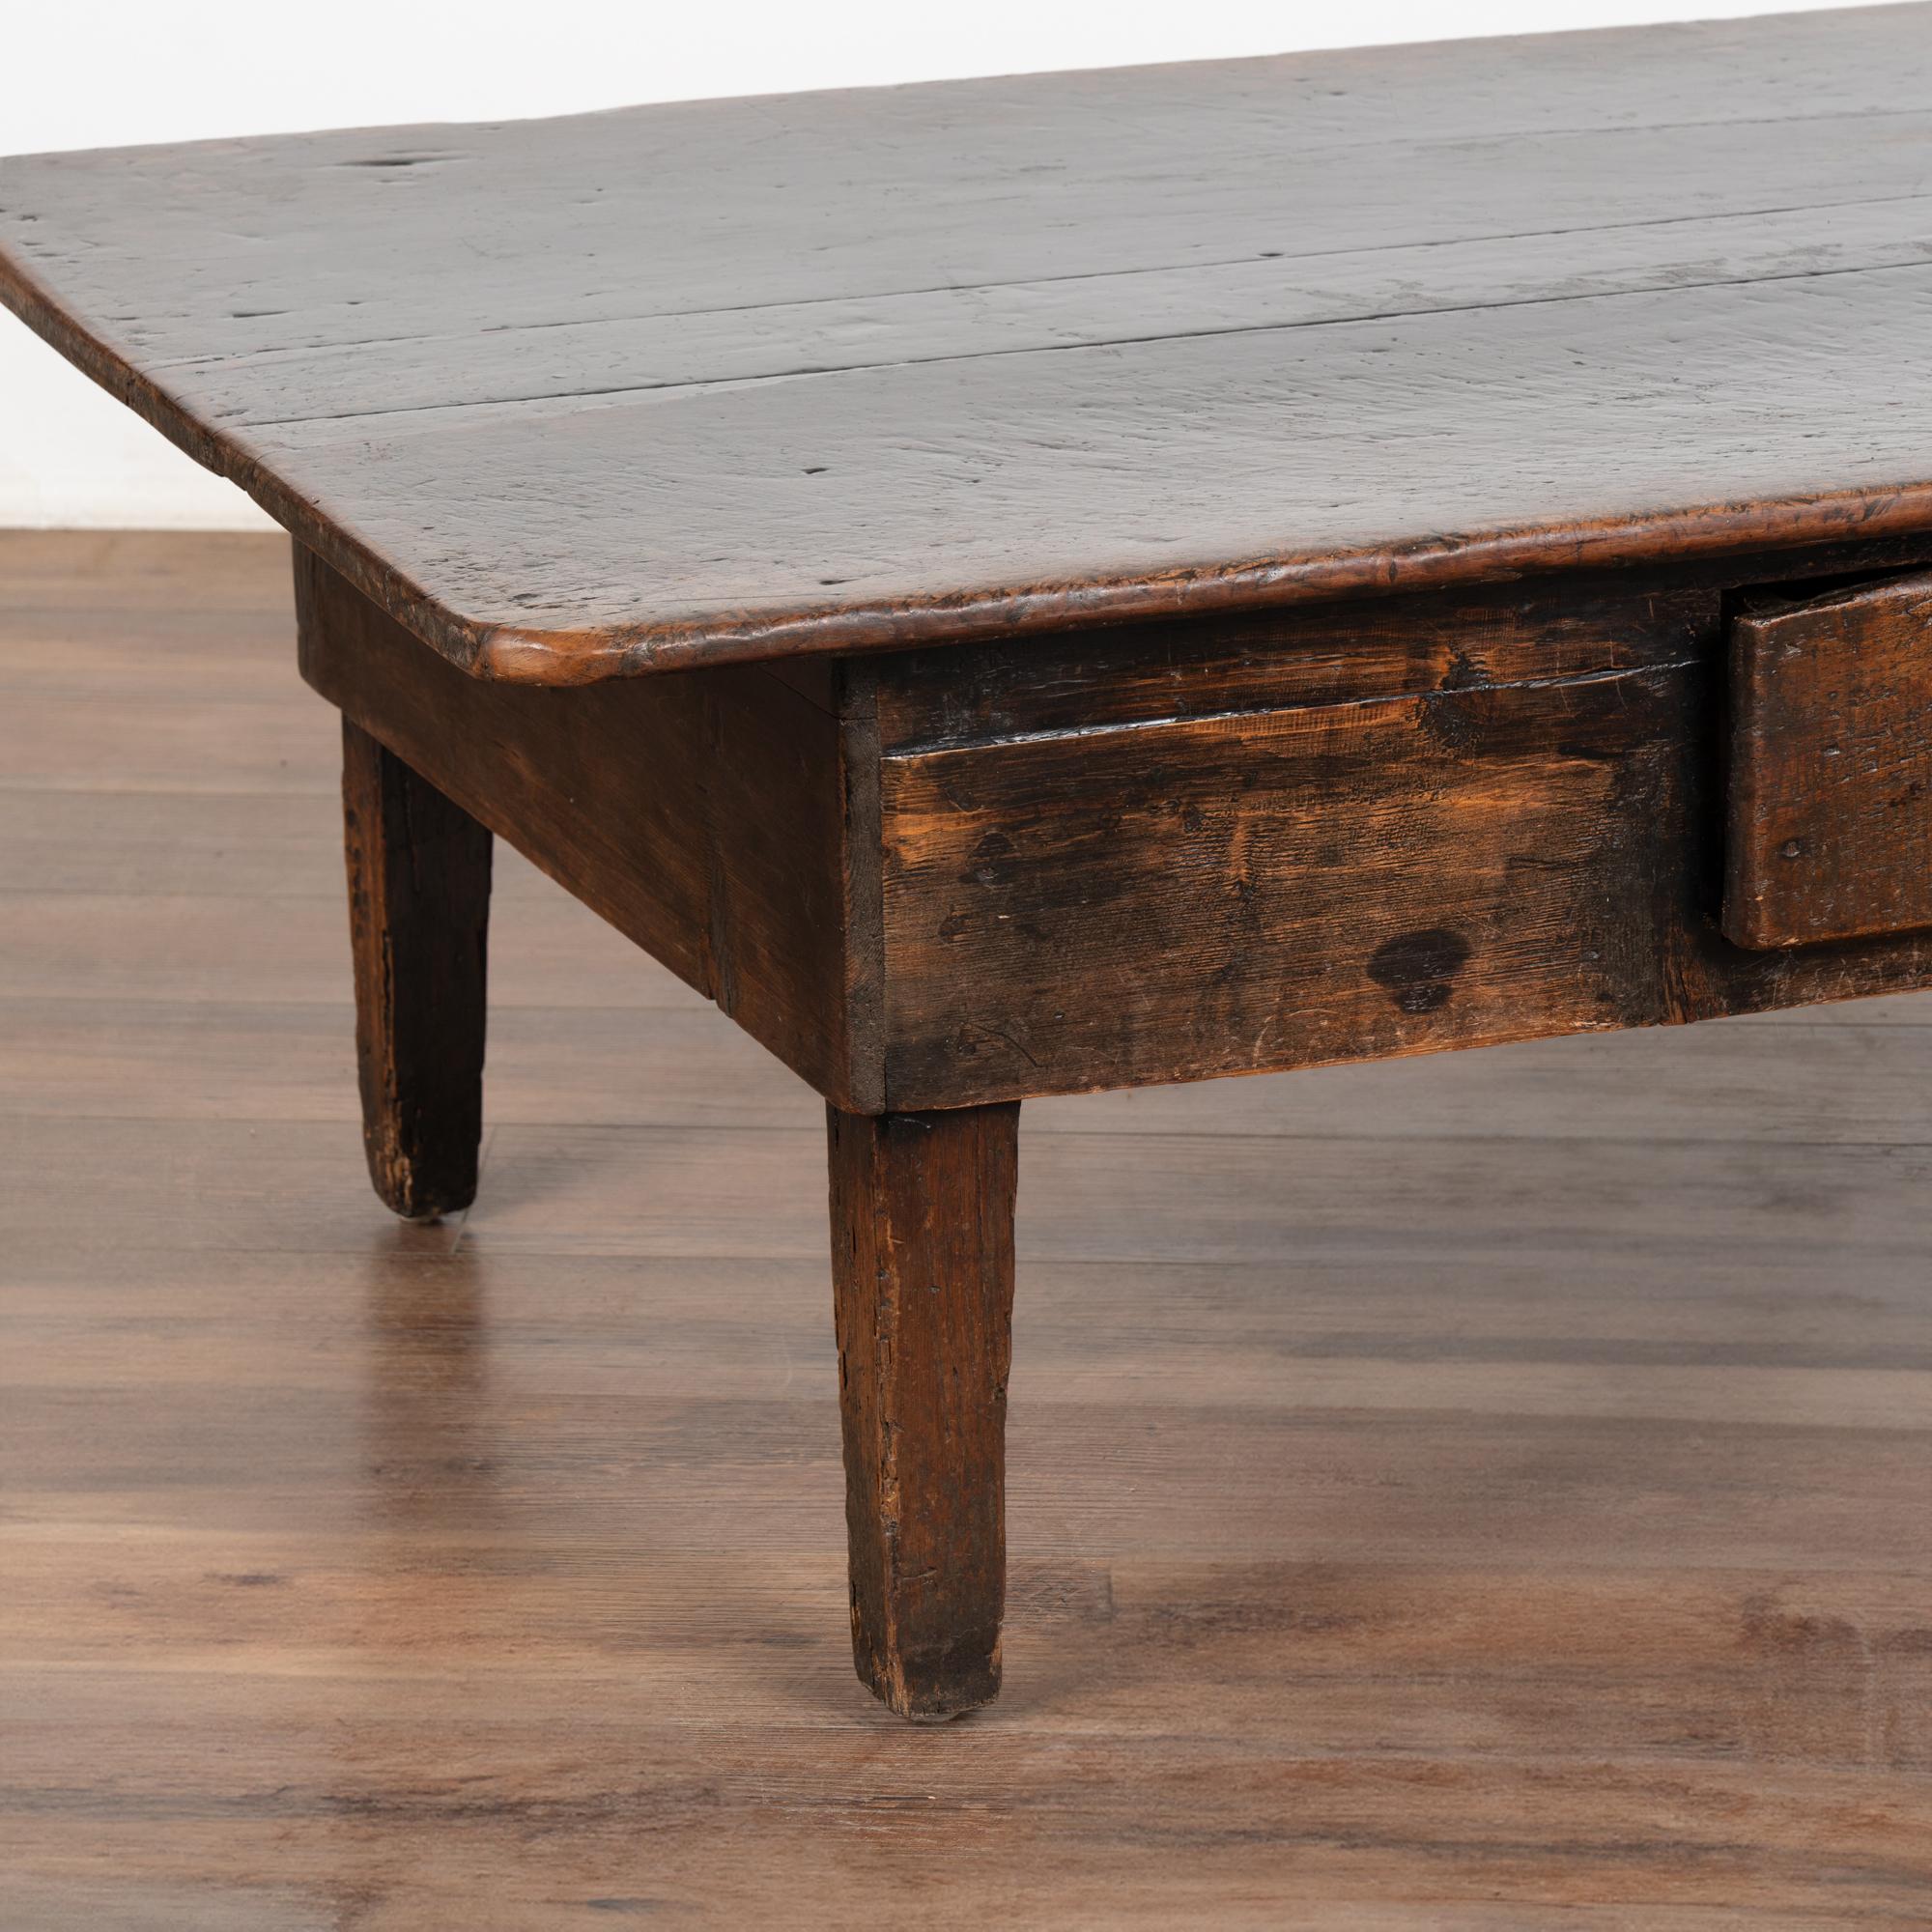 French Country Coffee Table With Single Drawer, Circa 1800-40 1